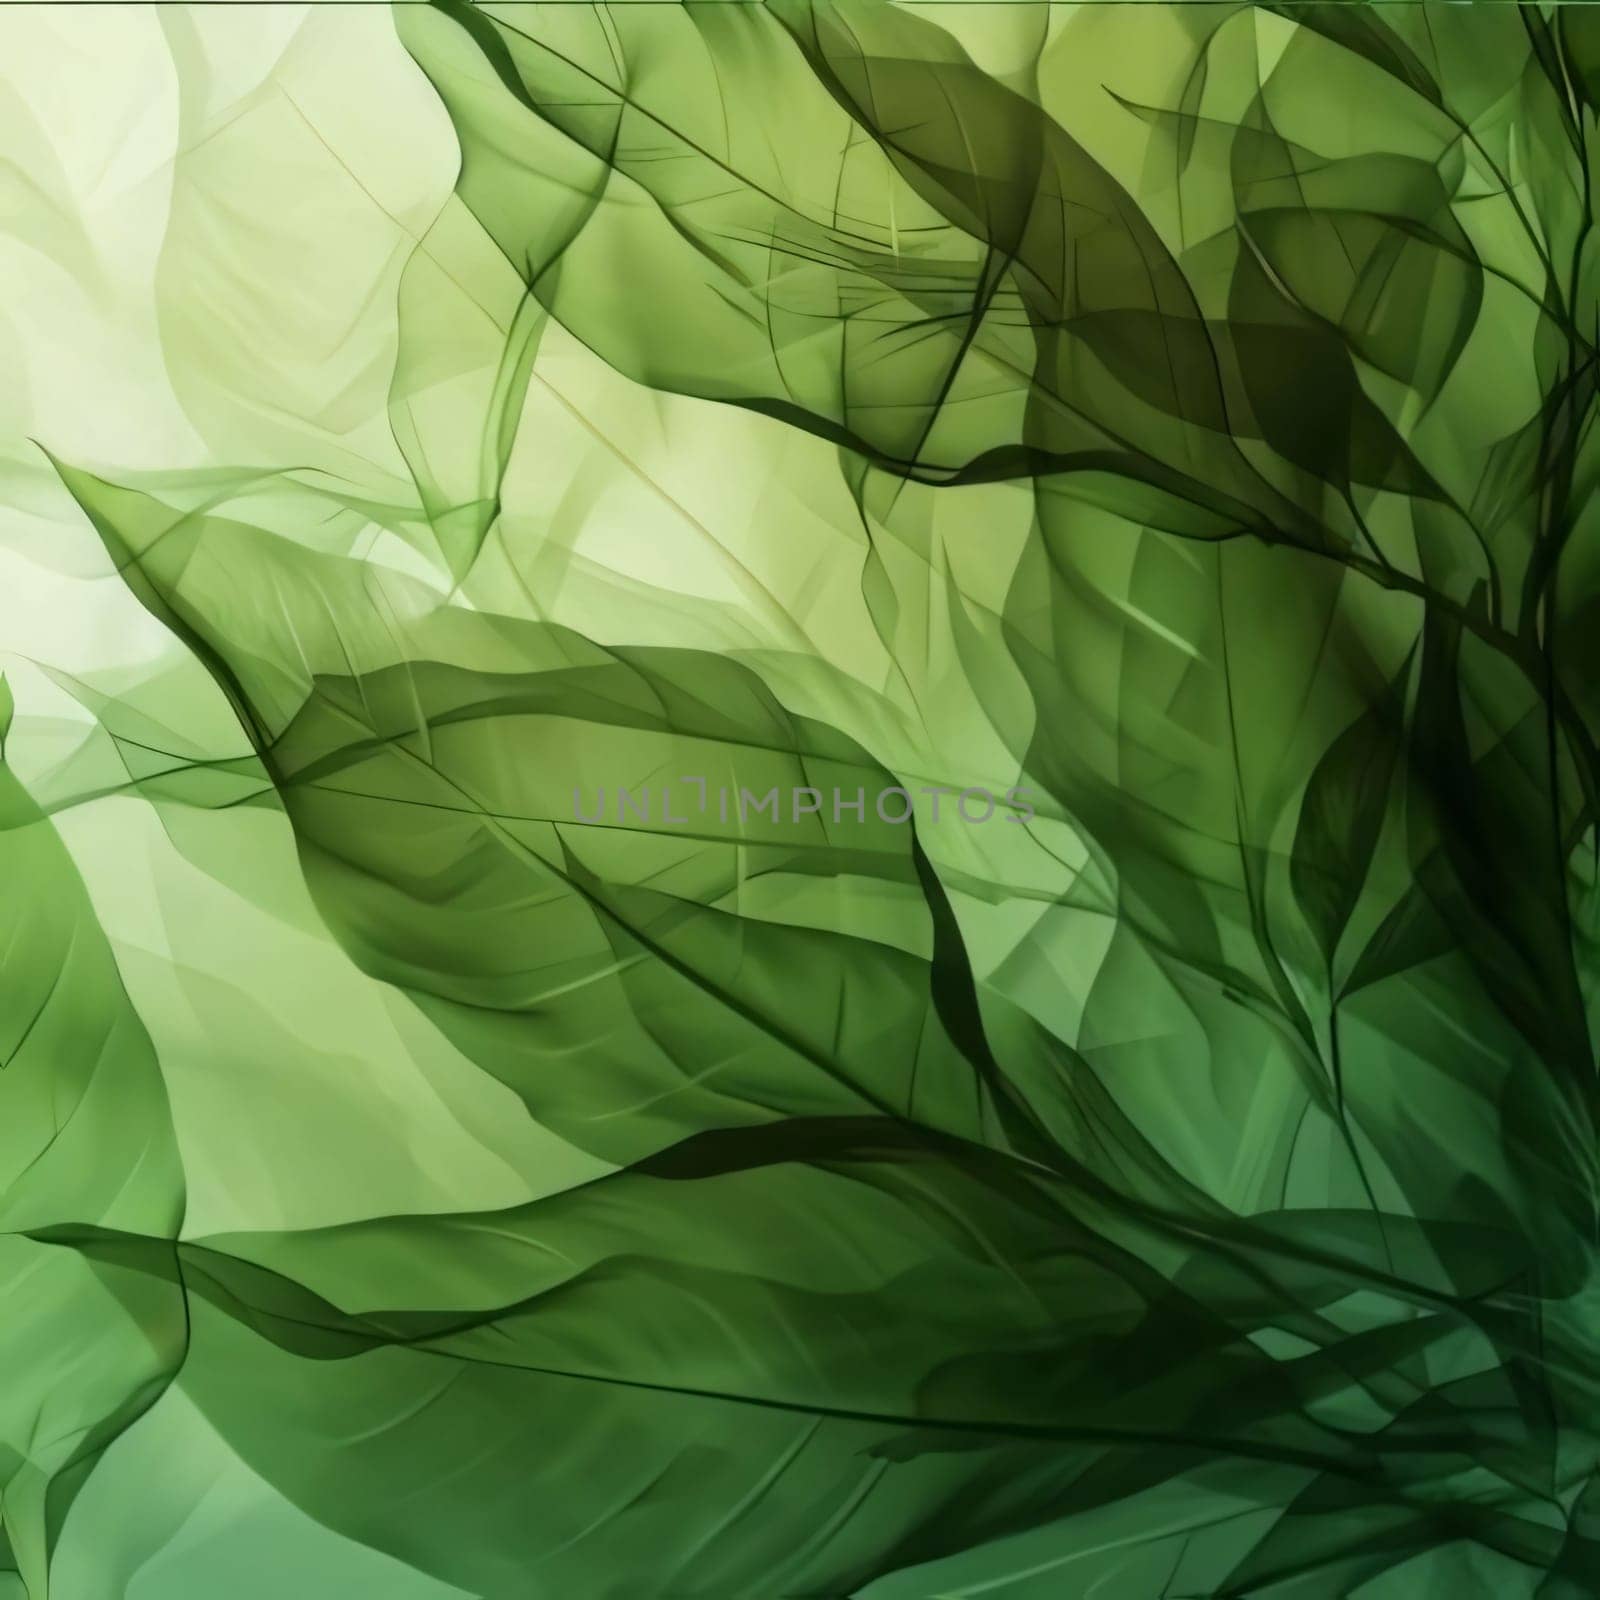 Abstract background design: abstract green background with smooth lines and curves in the center.